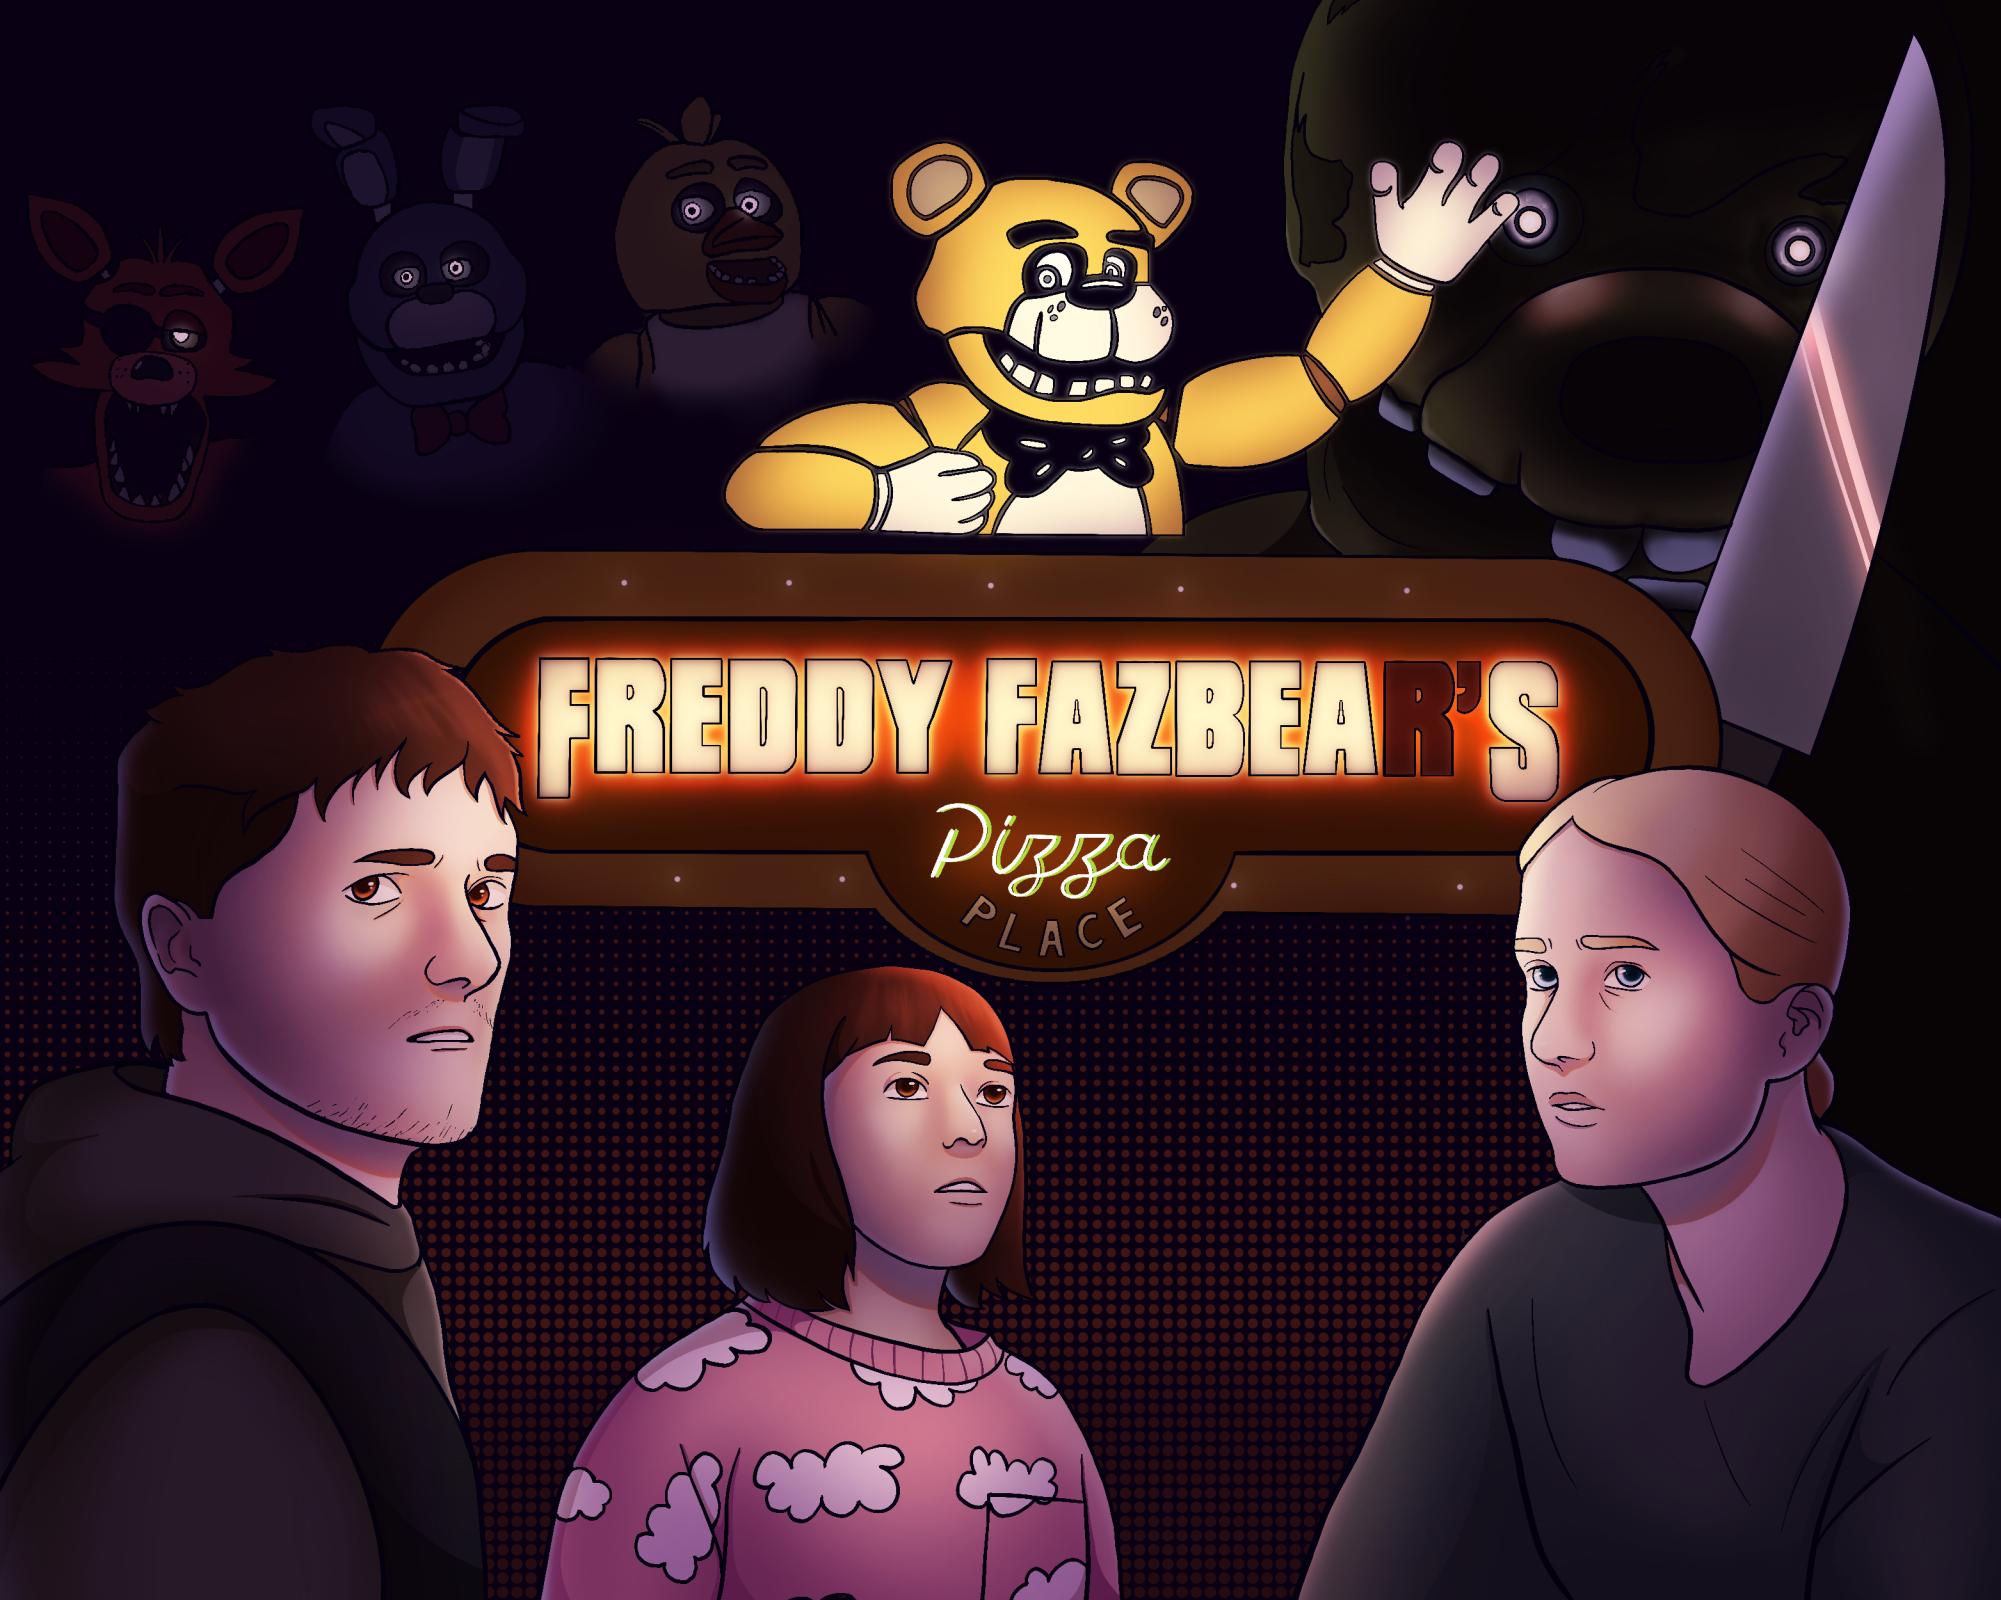 Five Nights at Freddy's”, A Quirky Animatronic Horror Story